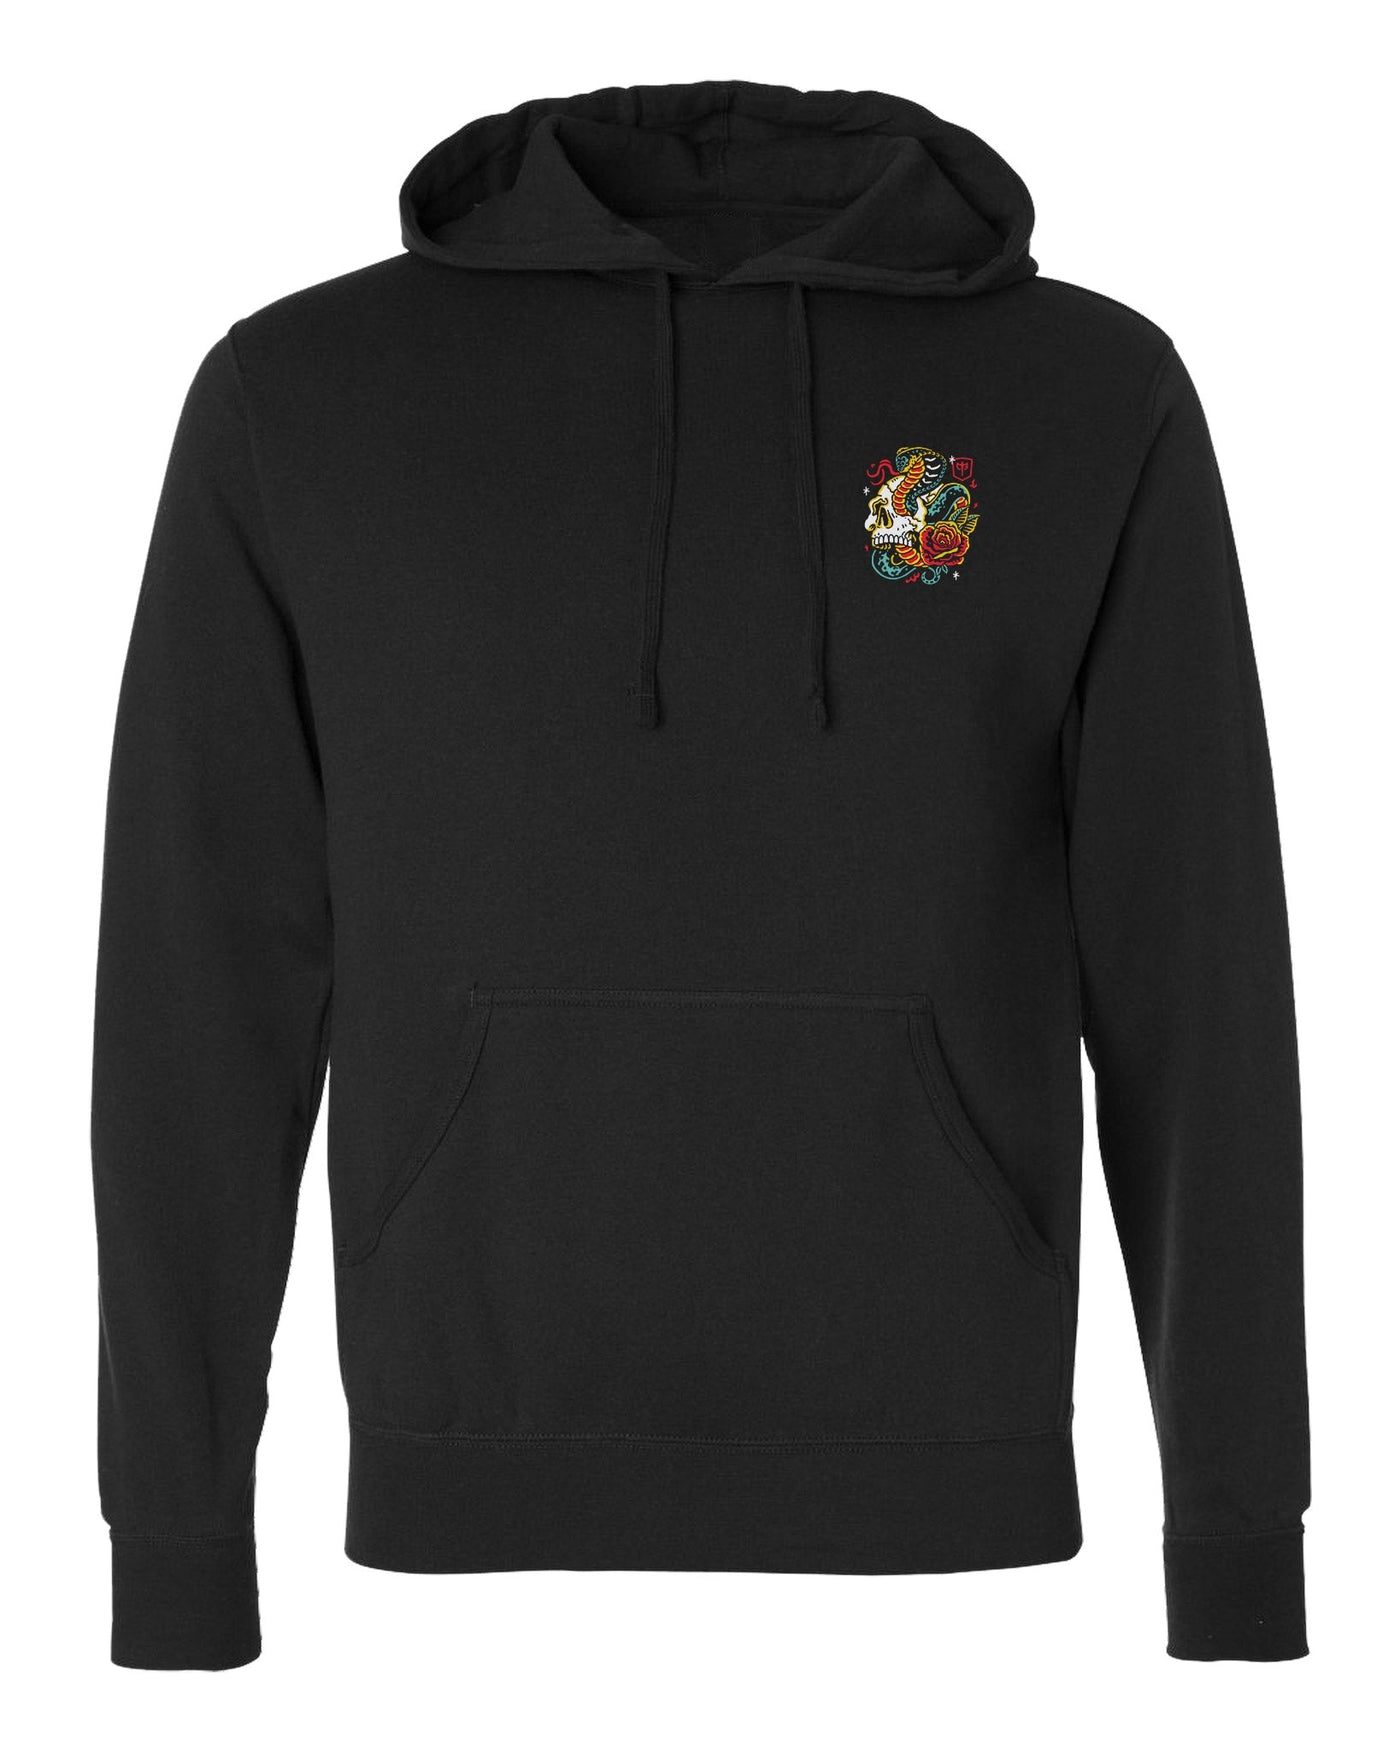 Conquer Till Death - on Black Pullover Hoodie - Conquering Barbell